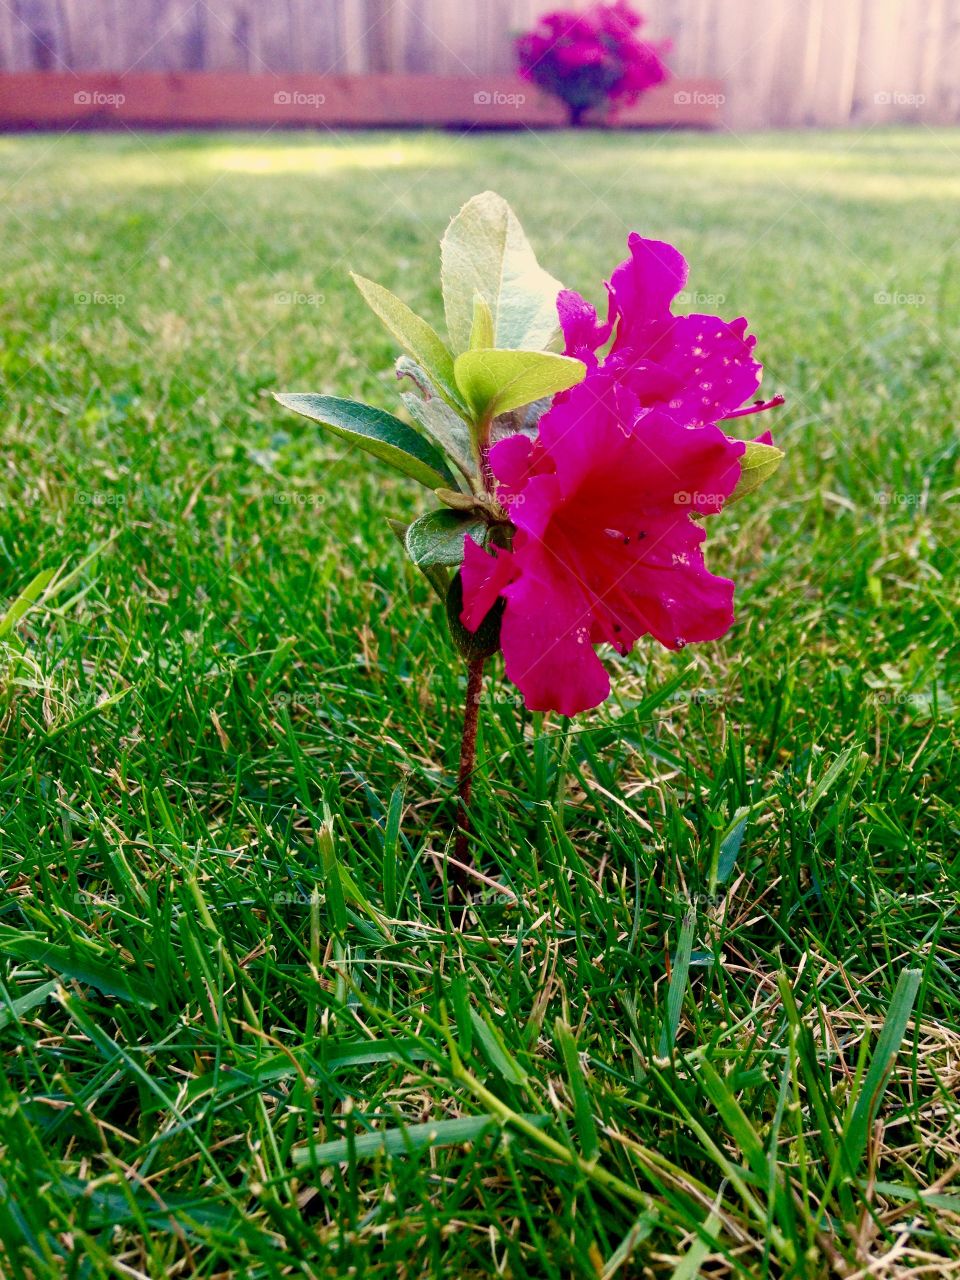 I Stand Alone. Beautiful little flower standing strong in the middle of the yard.